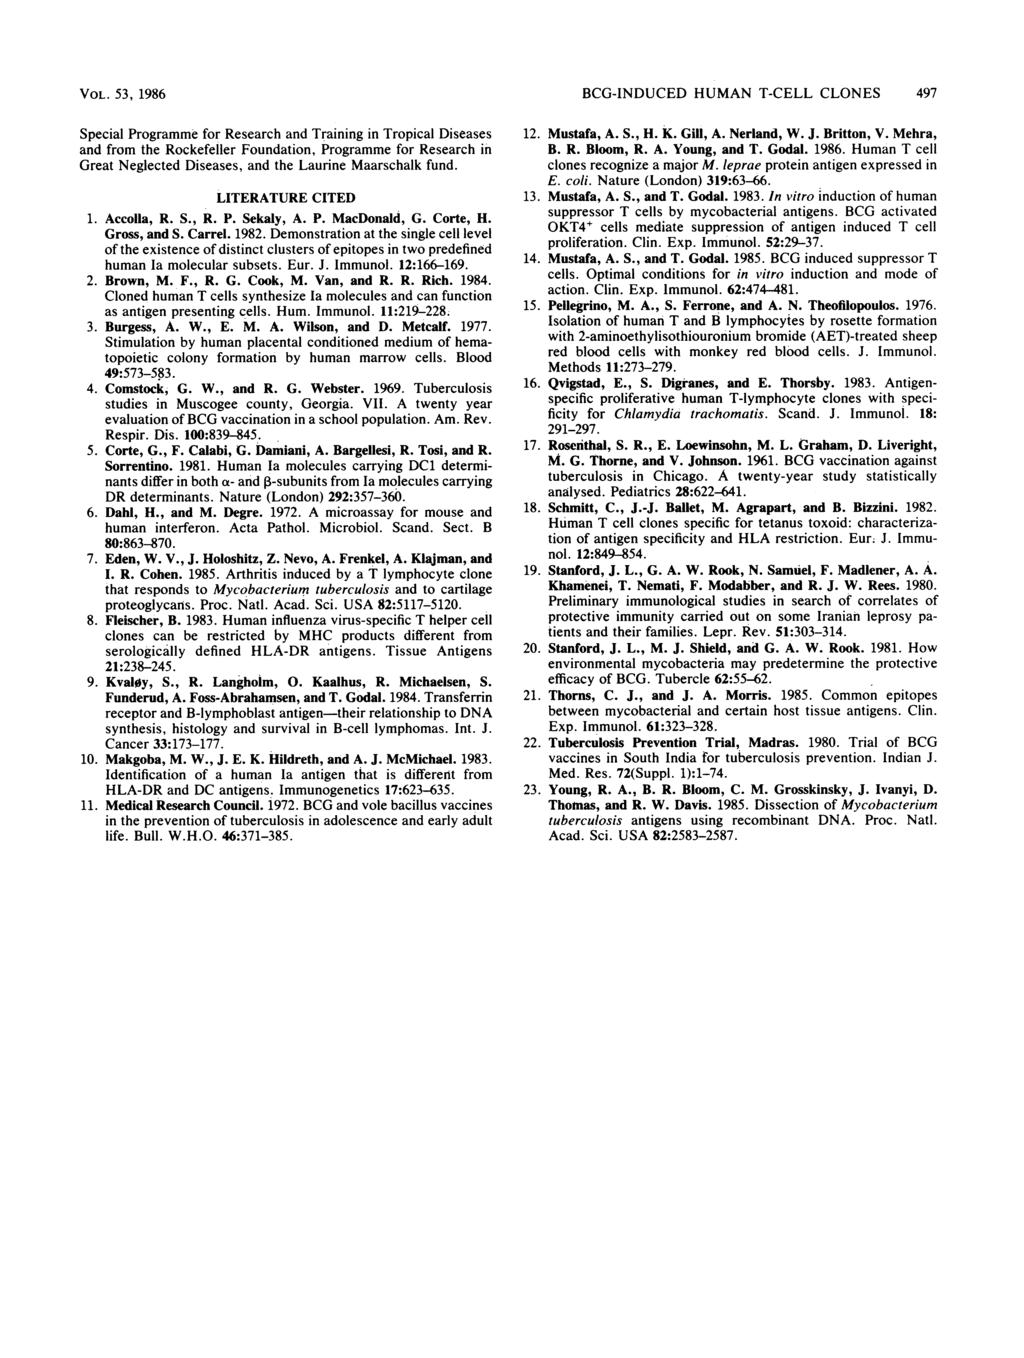 VOL. 53, 1986 Special Programme for Research and Training in Tropical Diseases and from the Rockefeller Foundation, Programme for Research in Great Neglected Diseases, and the Laurine Maarschalk fund.